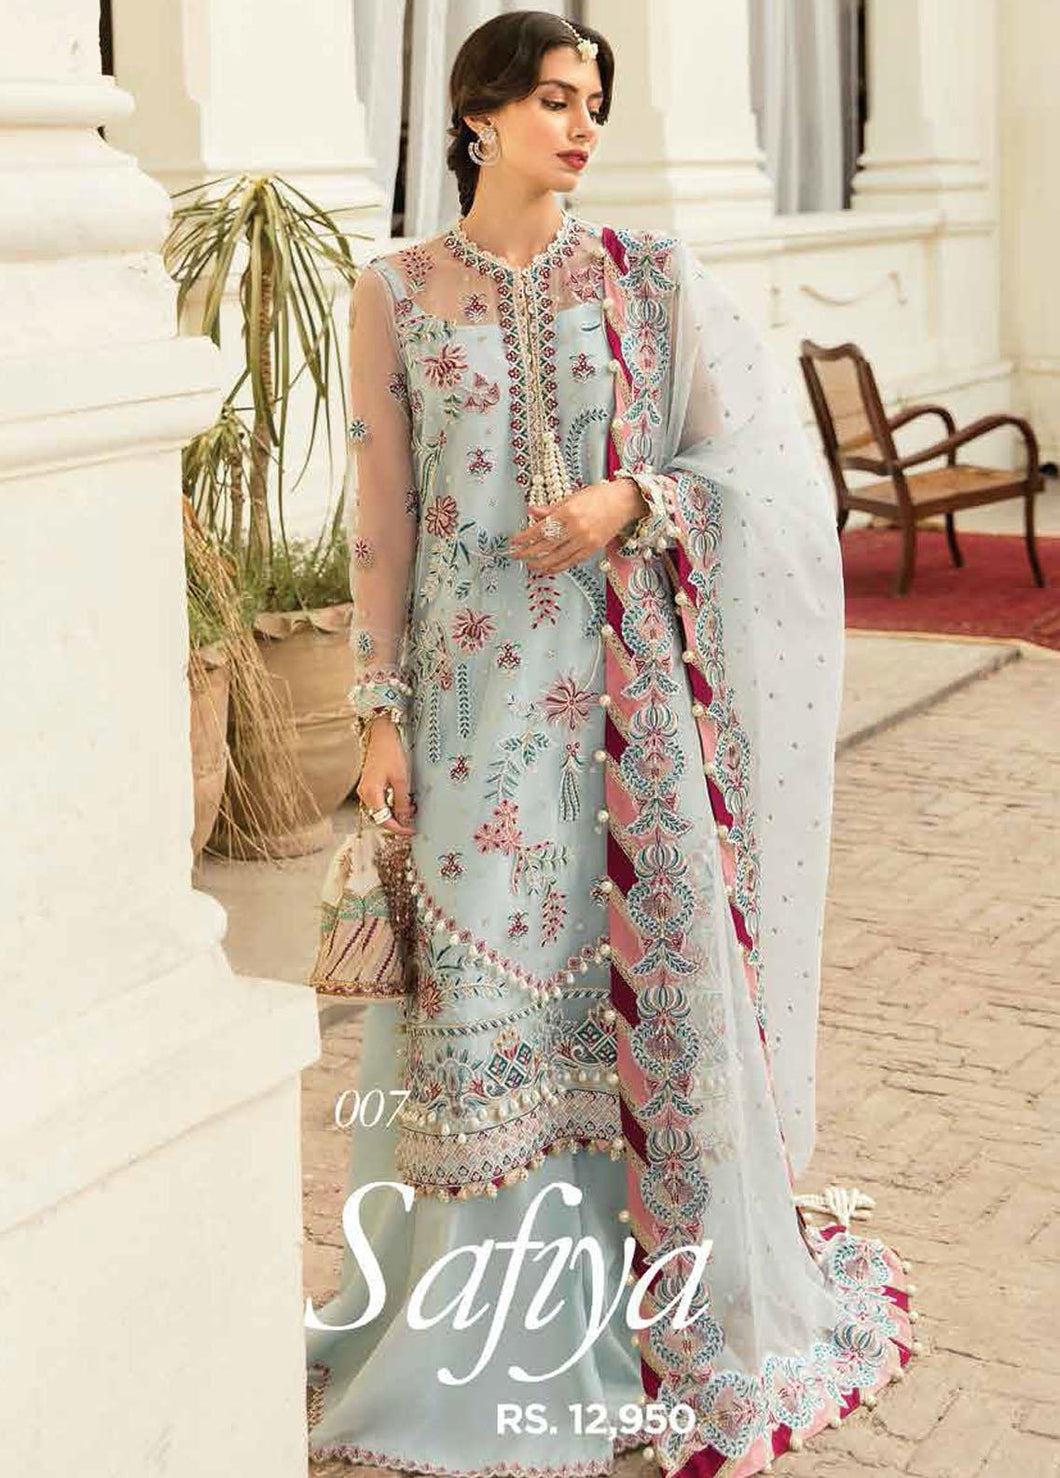 Afrozeh - Dhoop Kinaray | Luxury Formals Lawn 2022  Pakistani Wedding Dresses UK @Lebaasonline. Get Afrozeh Wedding Collection 2022 for Indian & Pakistani Brides UK at Lebaas. The Pakistani Wedding Dresses online UK can be customized here. Get your dress at doorstep in UK, USA, France, Birmingham from Lebassonline.